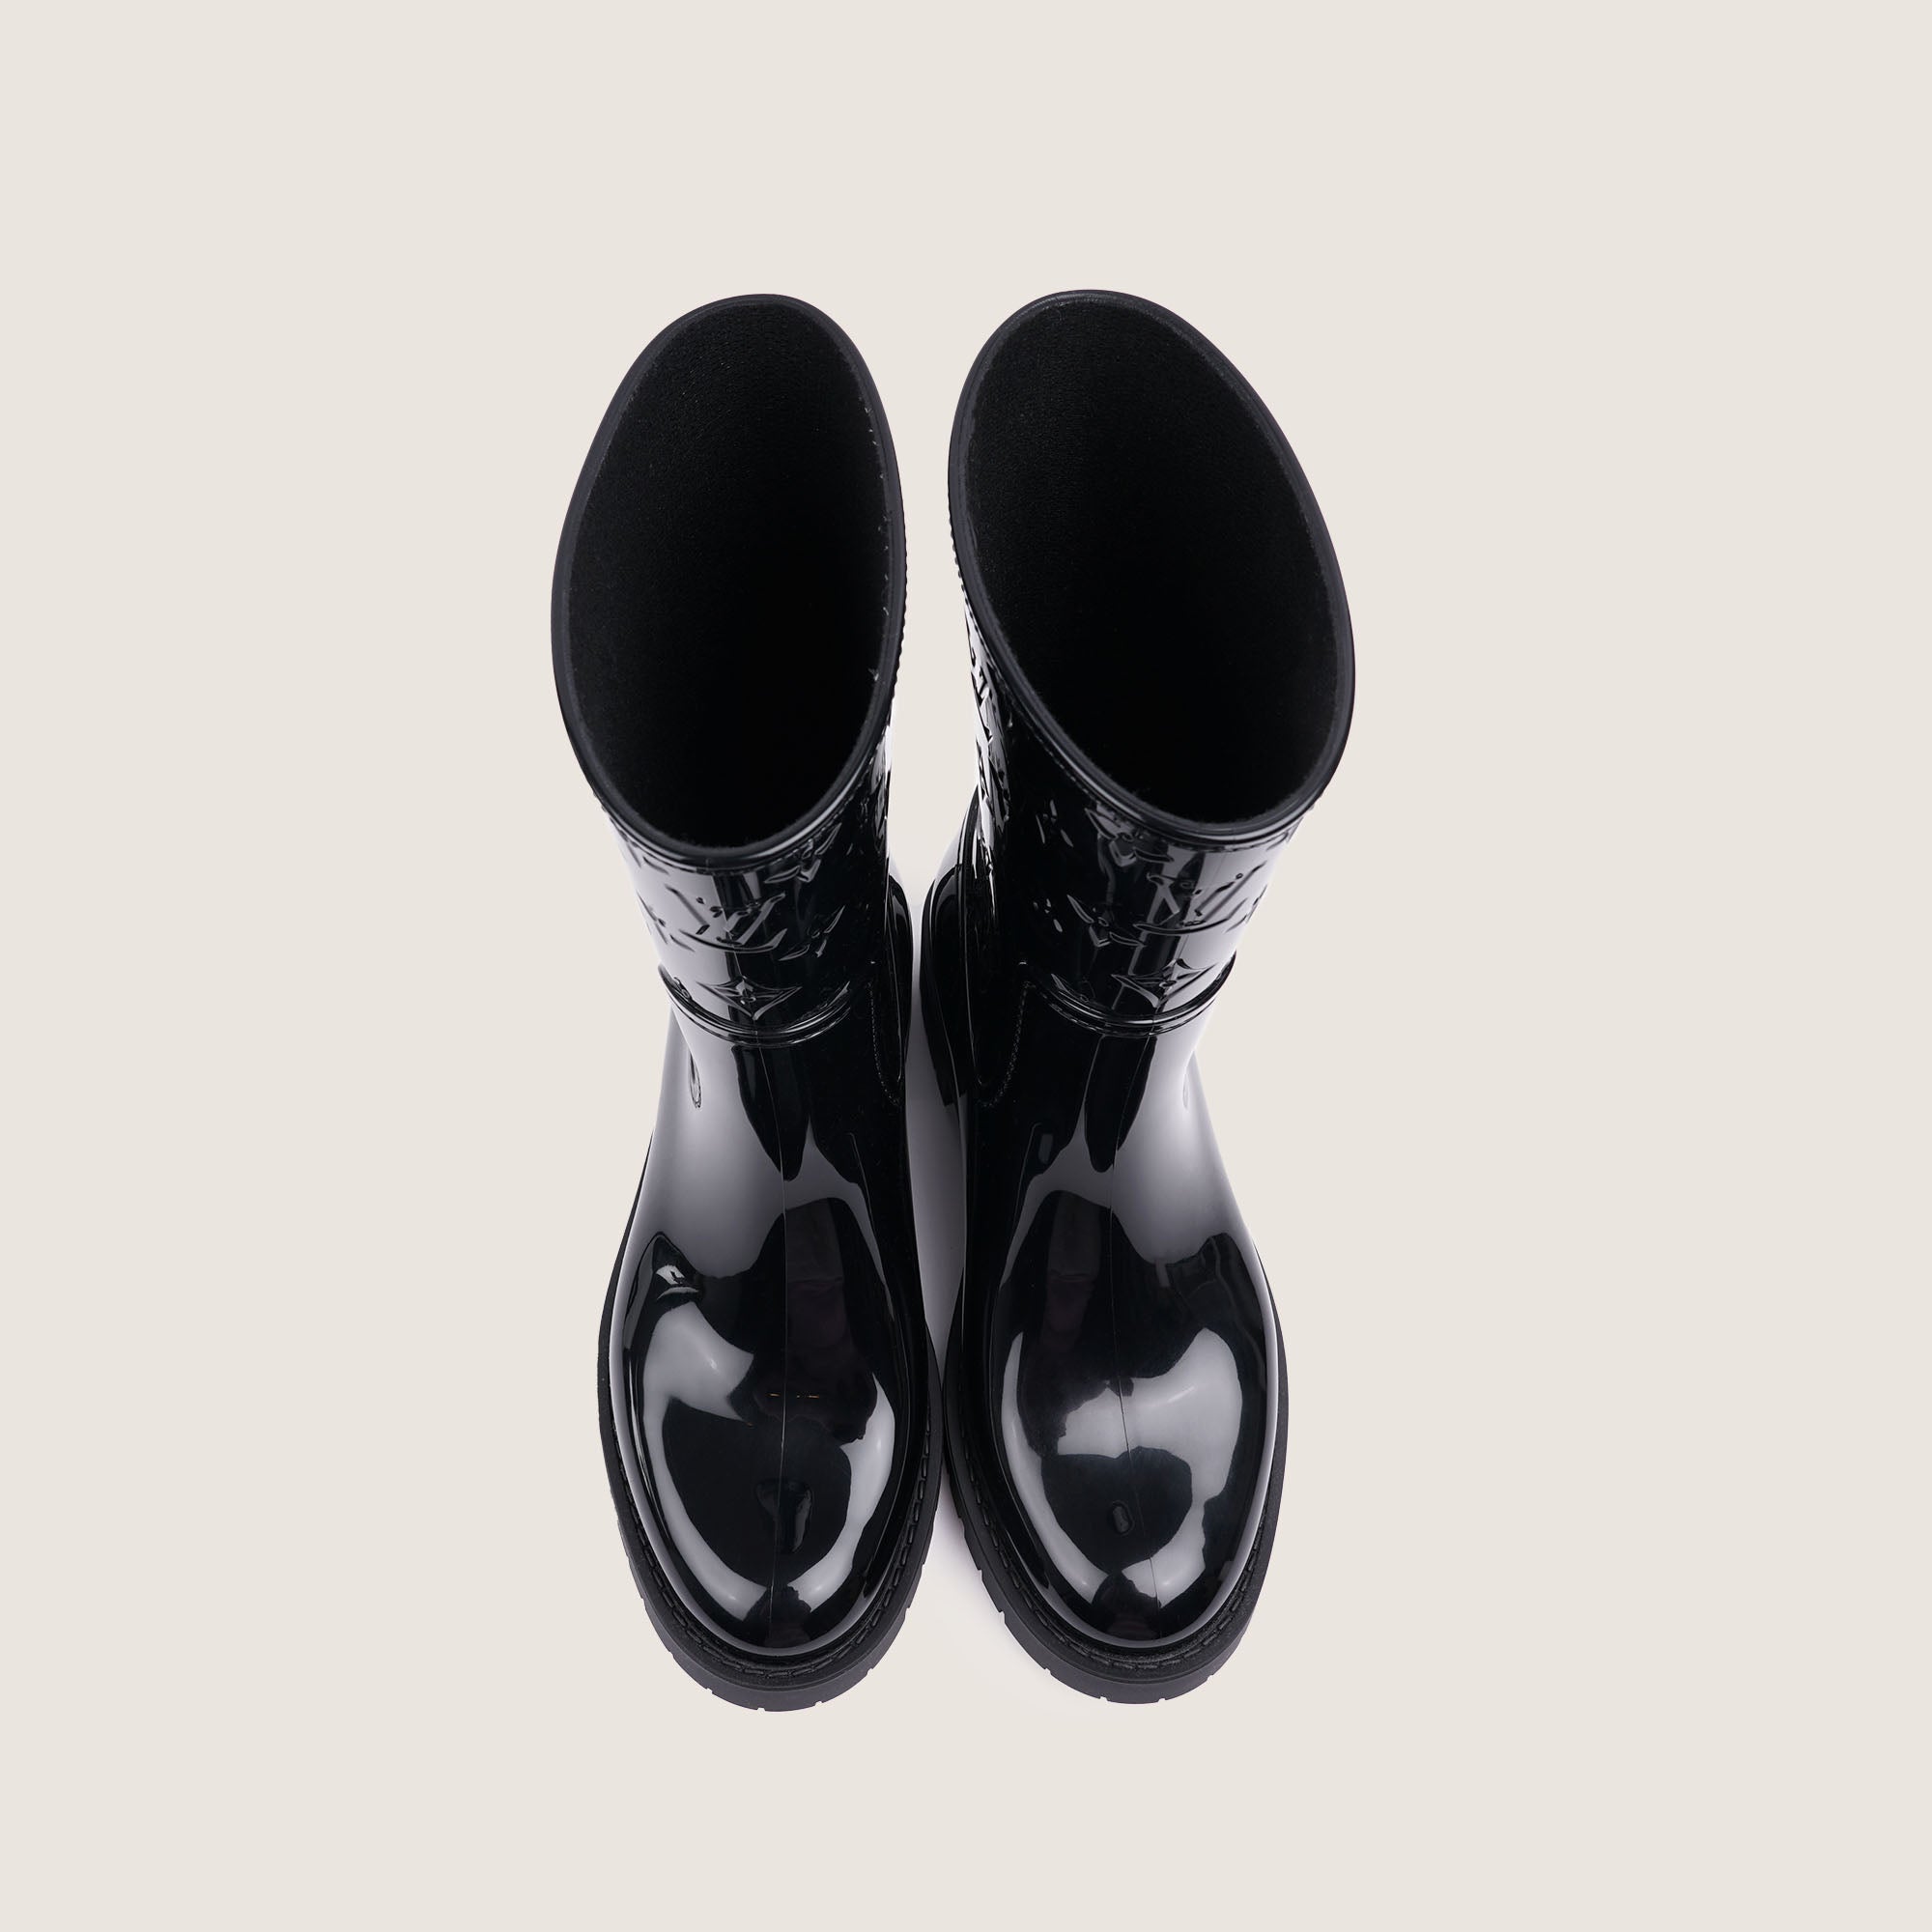 Drops Flat Half Boots 37 - LOUIS VUITTON - Affordable Luxury